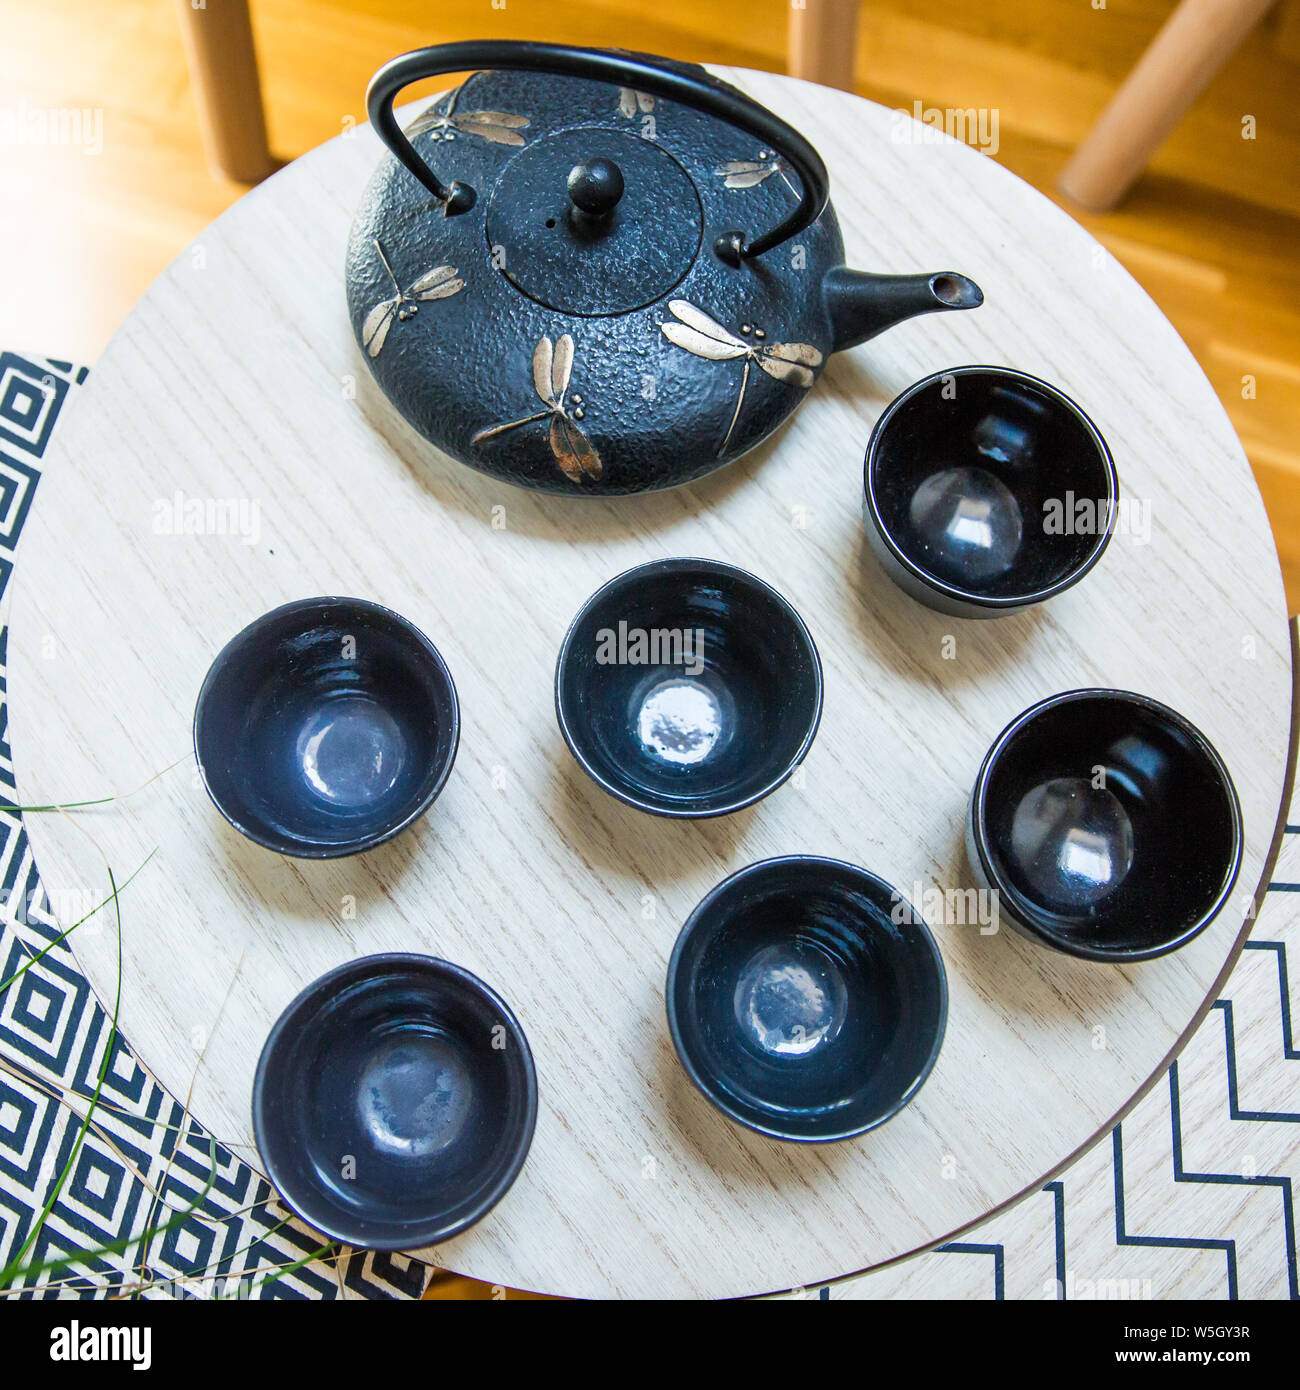 Stylish Interior Decoration of a Cast Iron Teapot with Dragonfly Decoration and Round Cups on Geometric Tables Stock Photo